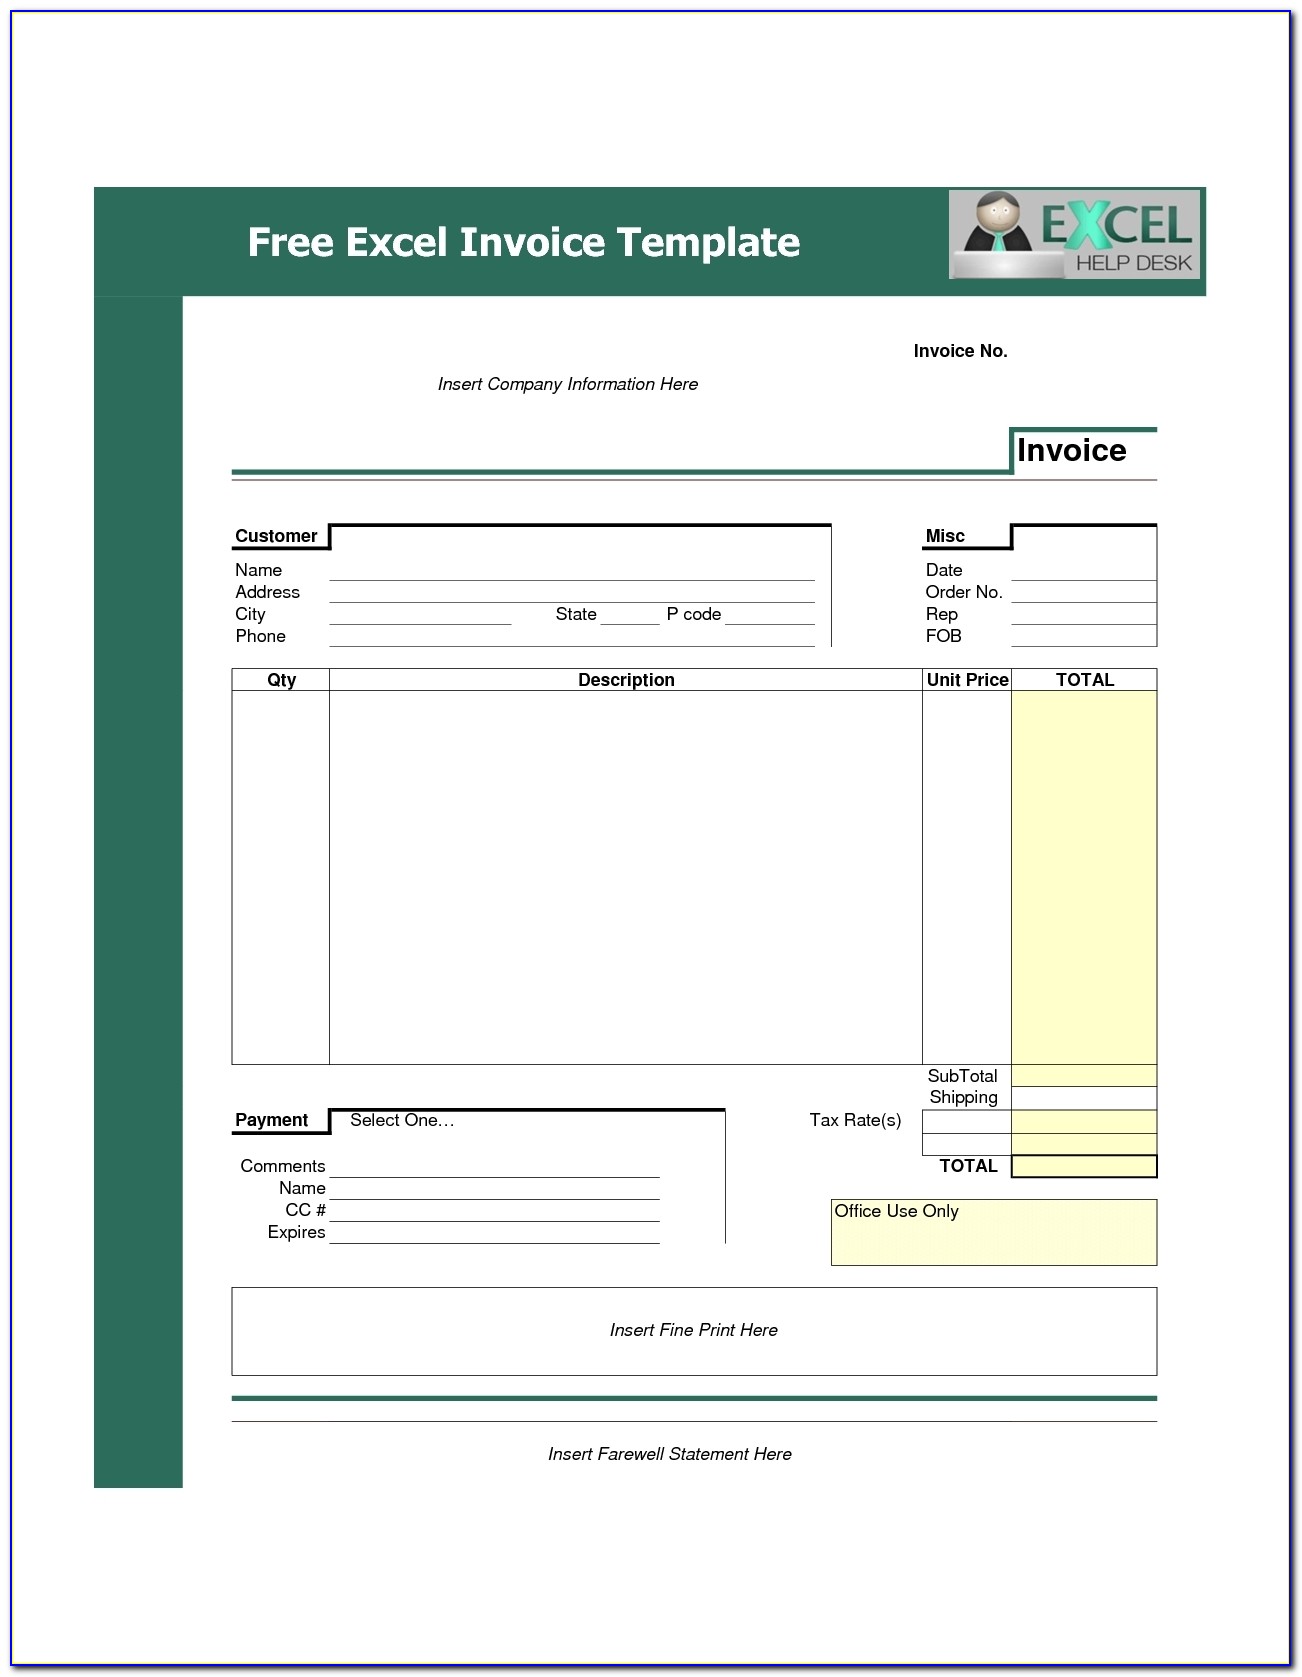 Free Download Tax Invoice Format In Excel Invoice Template Free 2016 Tax Invoice Format In Excel Free Download